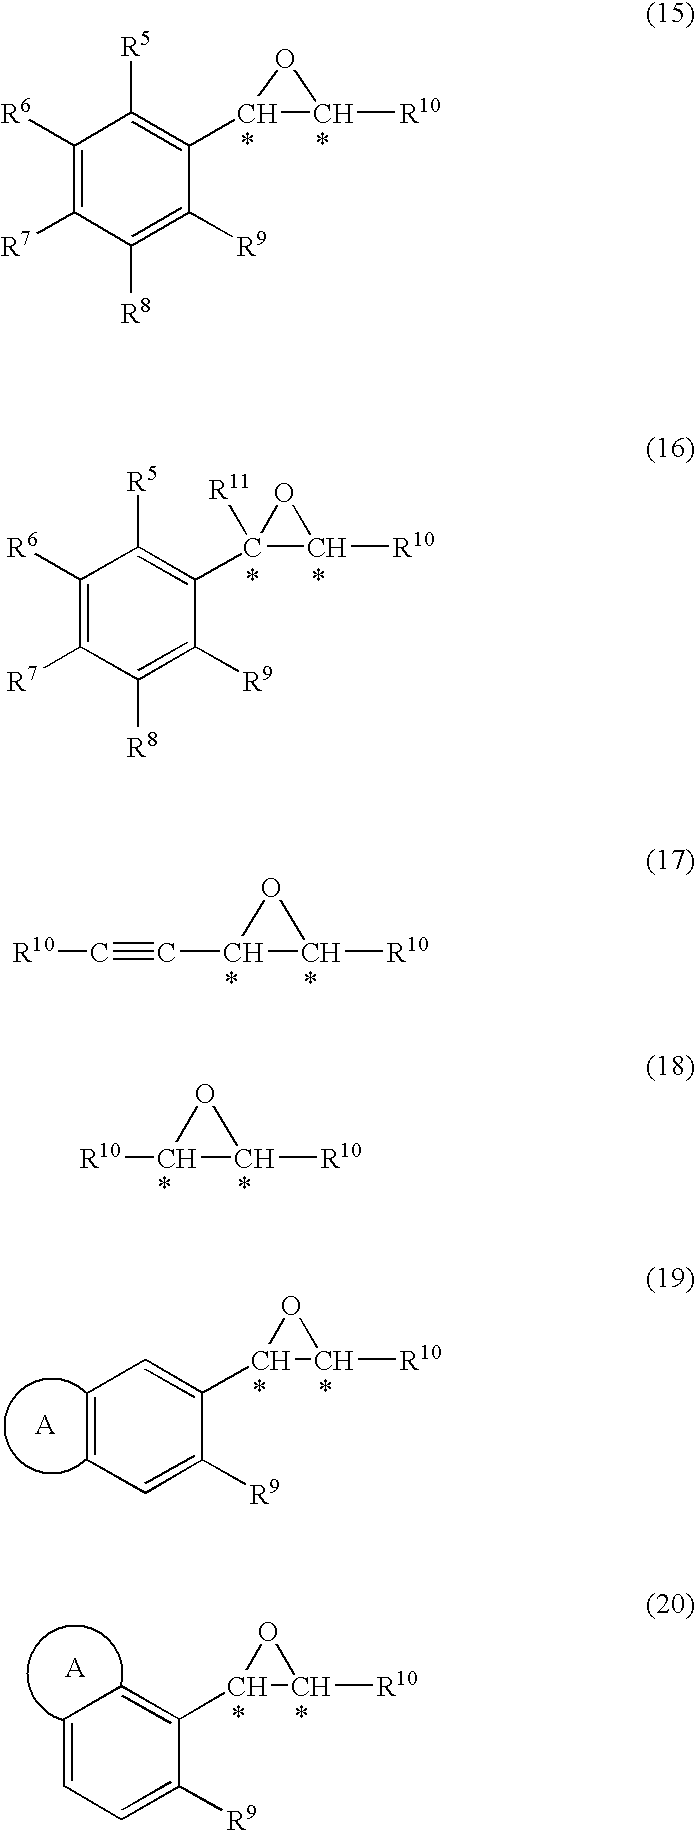 Process for production of optically active epoxy compound